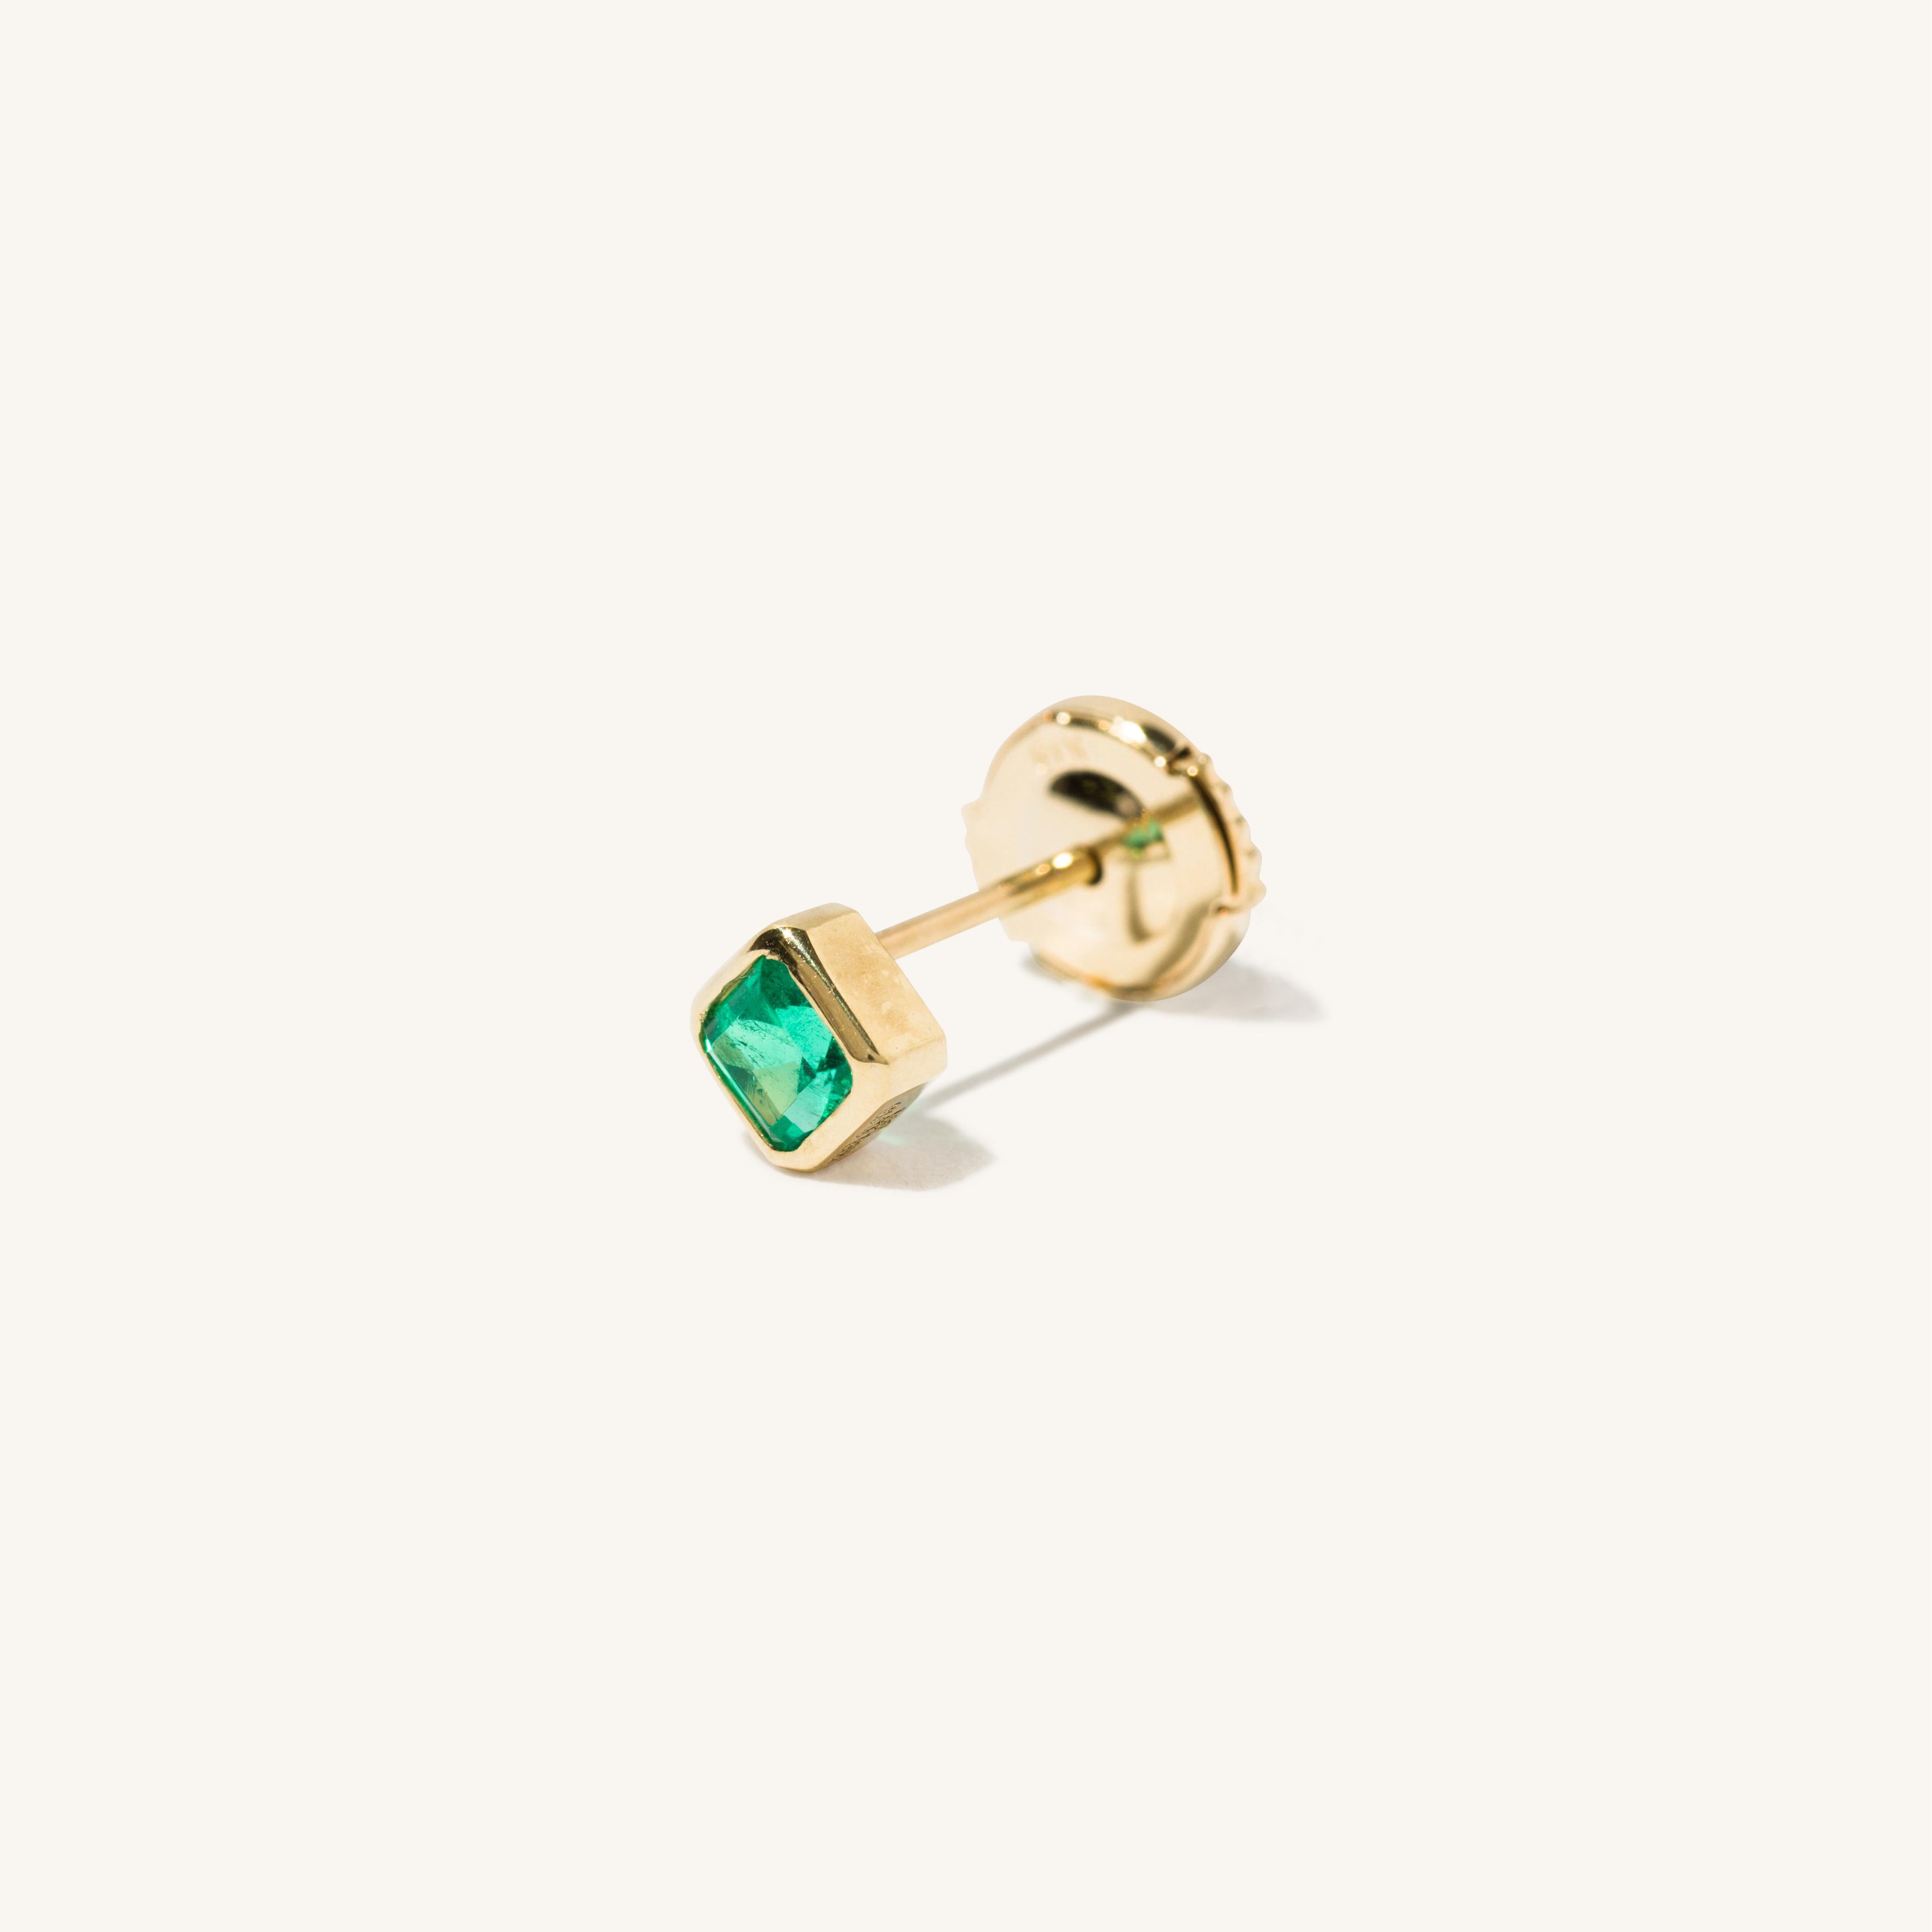 Milamore's one of a kind Emerald Earring. By working closely with our atelier in Japan, each earring is different and features a uniquely cut emerald set with 18 karat yellow gold. Please reach out to us via our 1st Dibs storefront for a selection